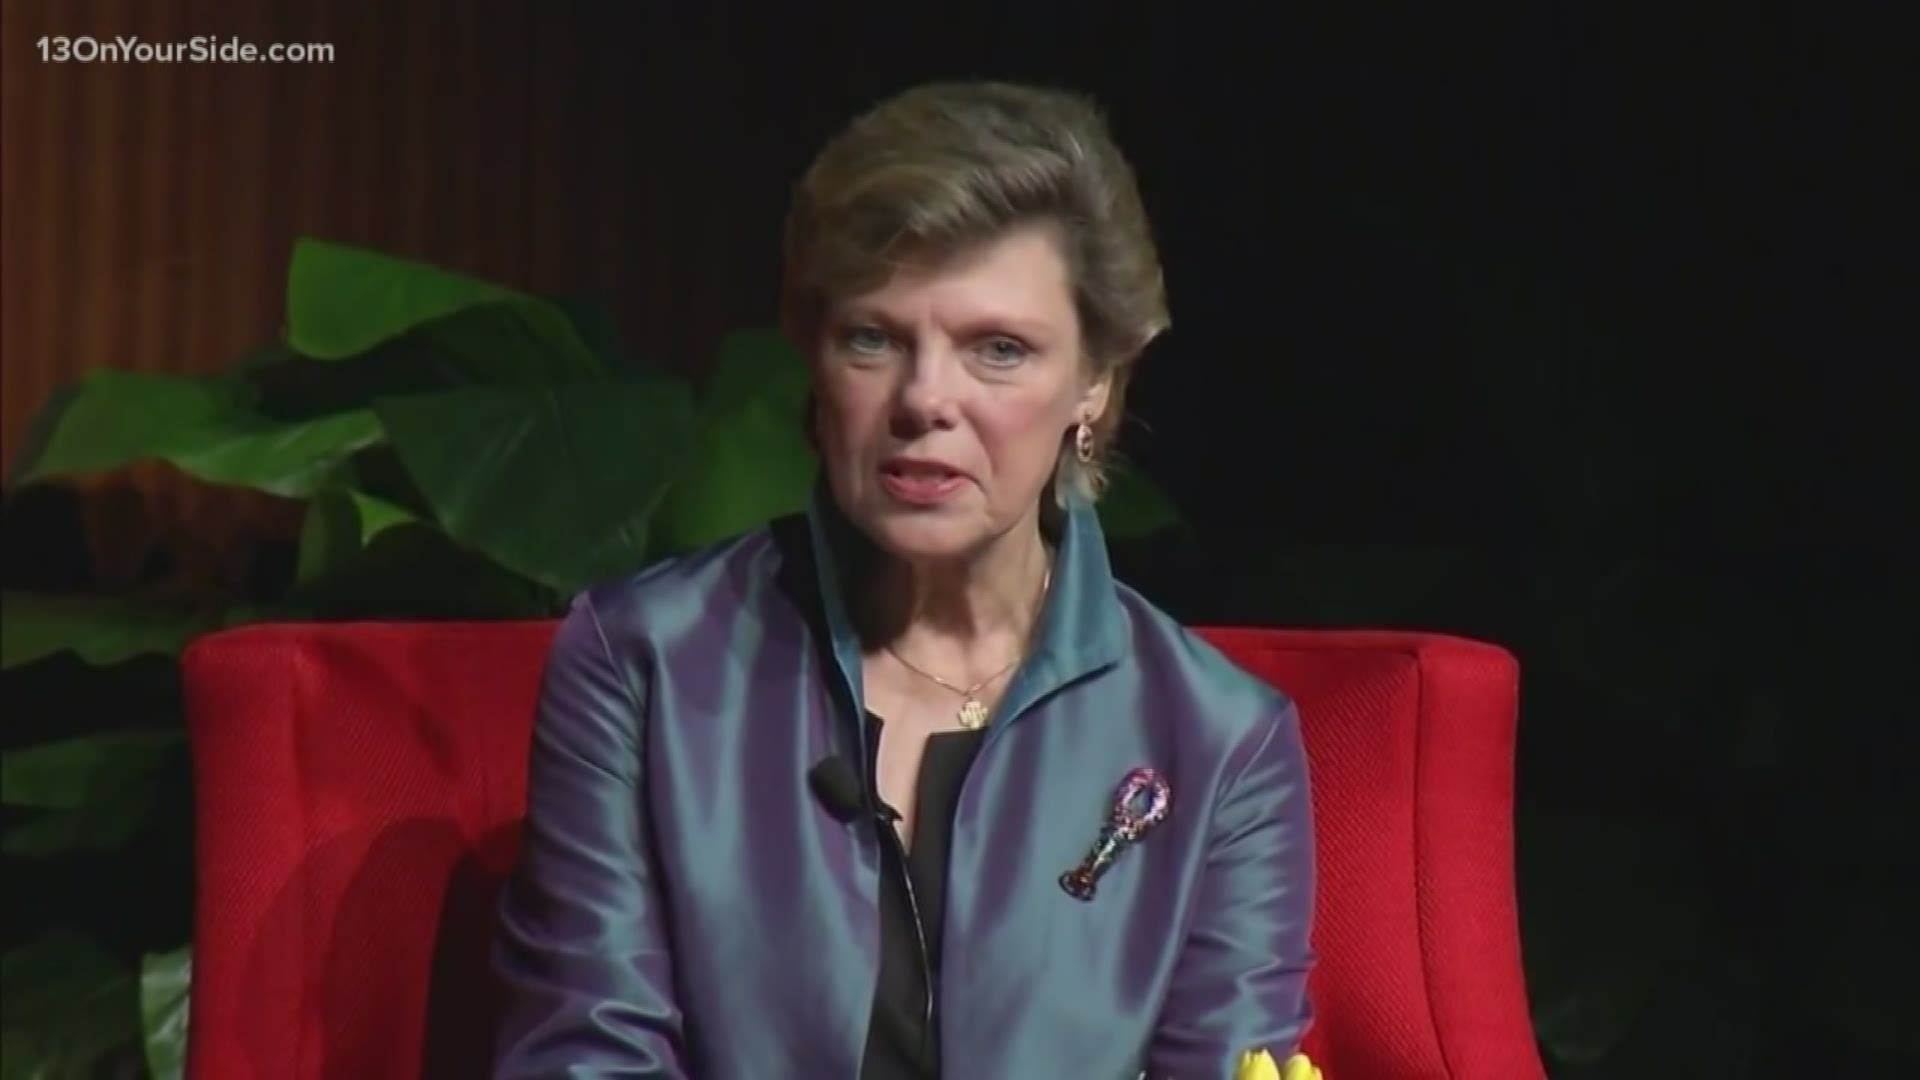 ABC News journalist and political commentator Cokie Roberts has died at the age of 75, according to reports from ABC News Tuesday, Sept. 17. Her death was due to complication from breast cancer, according to ABC News. She is survived by her husband, fellow journalist Steven Roberts, her children, Lee and Rebecca and her six grandchildren.